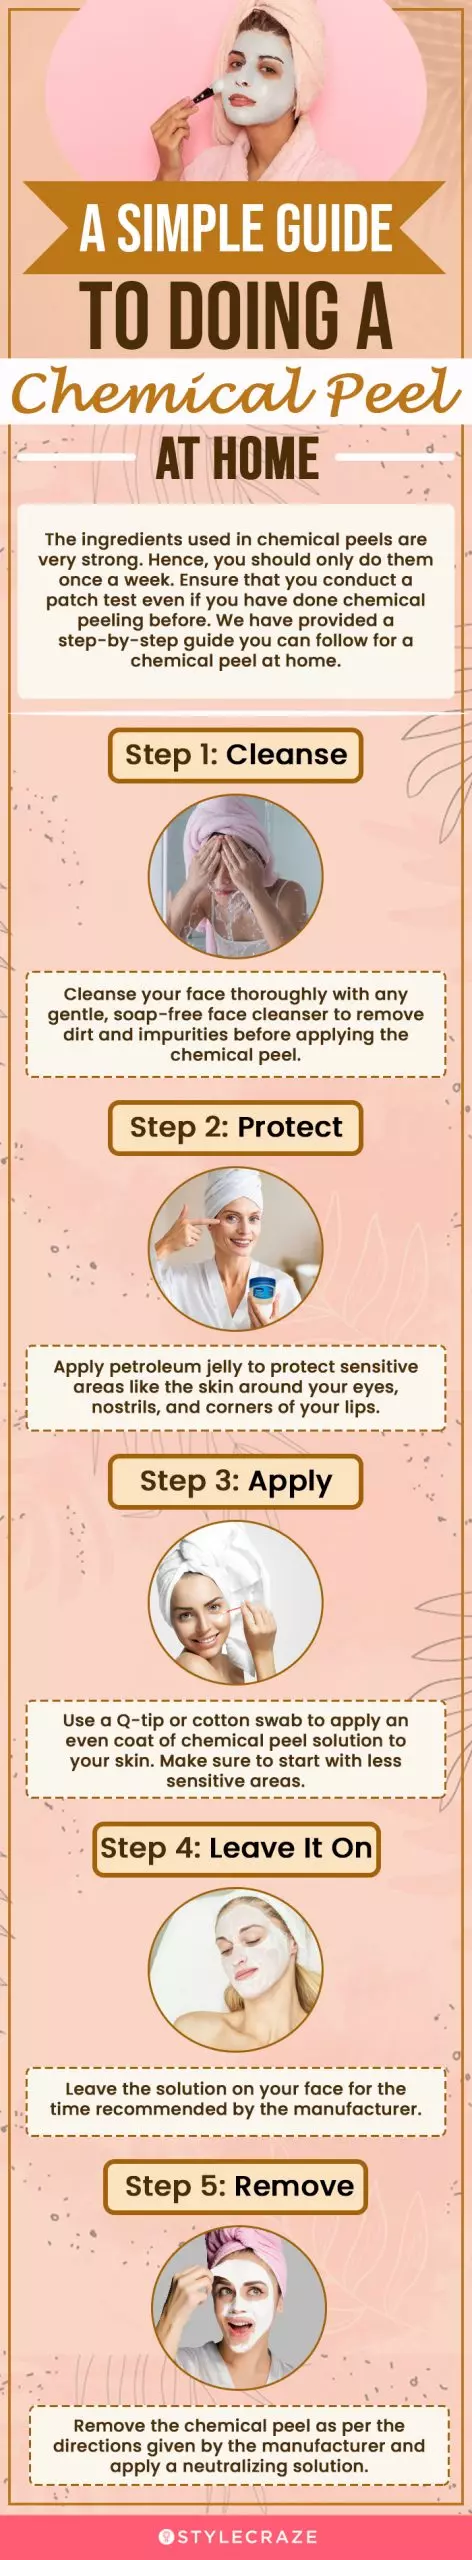 a simple guide to doing a chemical peel at home (infographic)